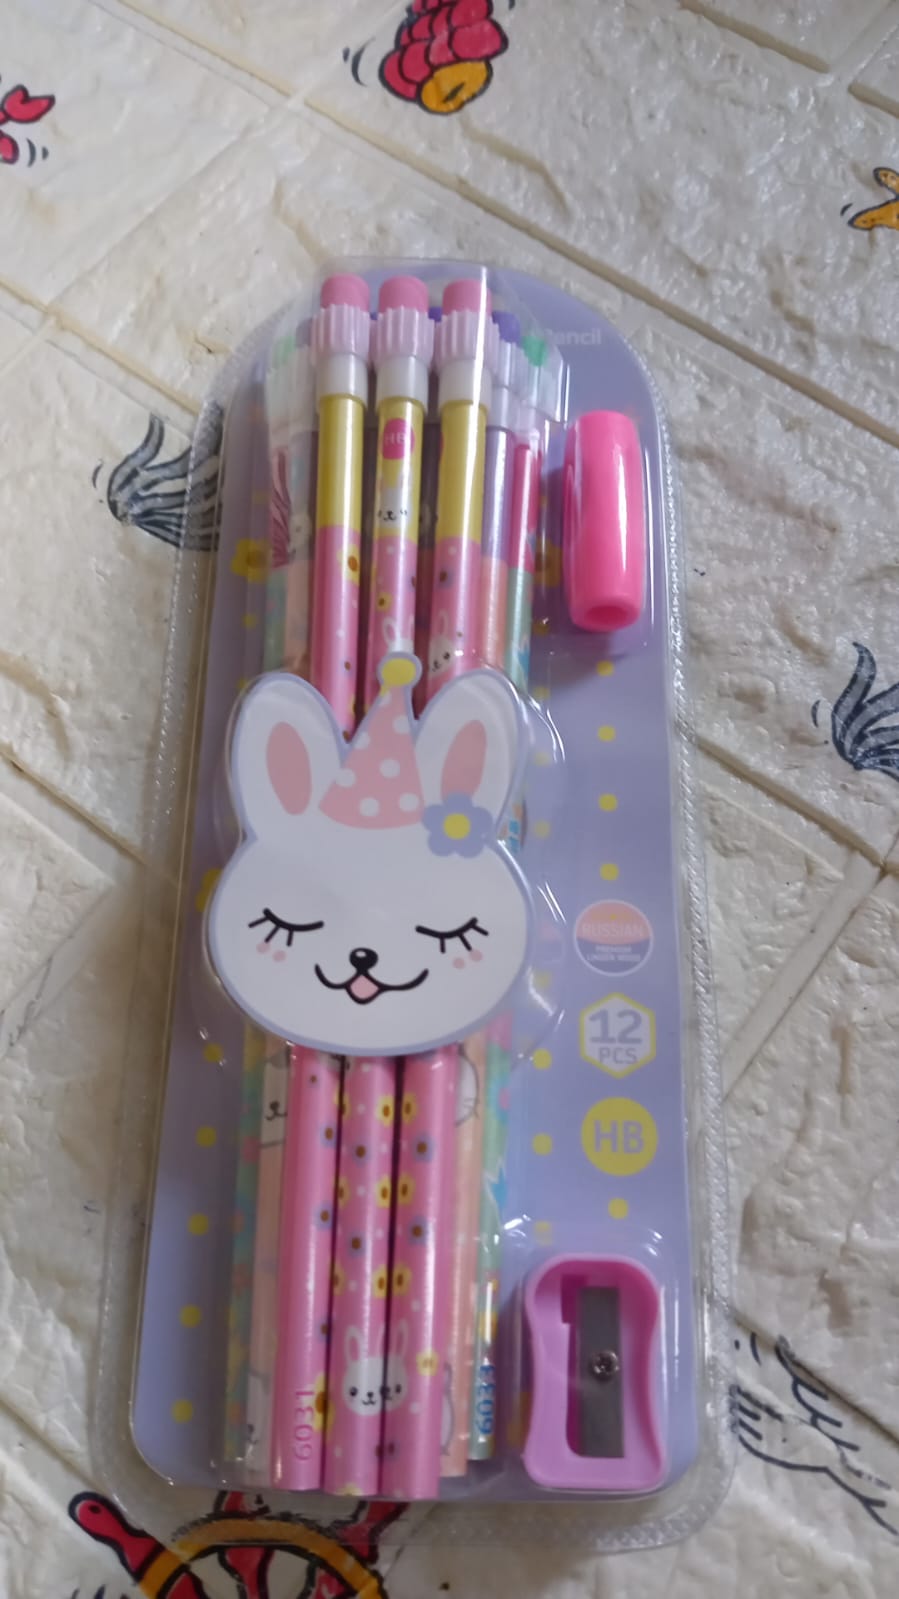 Cute Rabbit Bear Drawing Graphite Writing Pencil Set with Pencil Sharpener & Eraser, Pencil and Eraser Set with Eraser for Kids, for Girls, Fancy School Stationary, Birthday Party Return Gift (14 Pc Set)